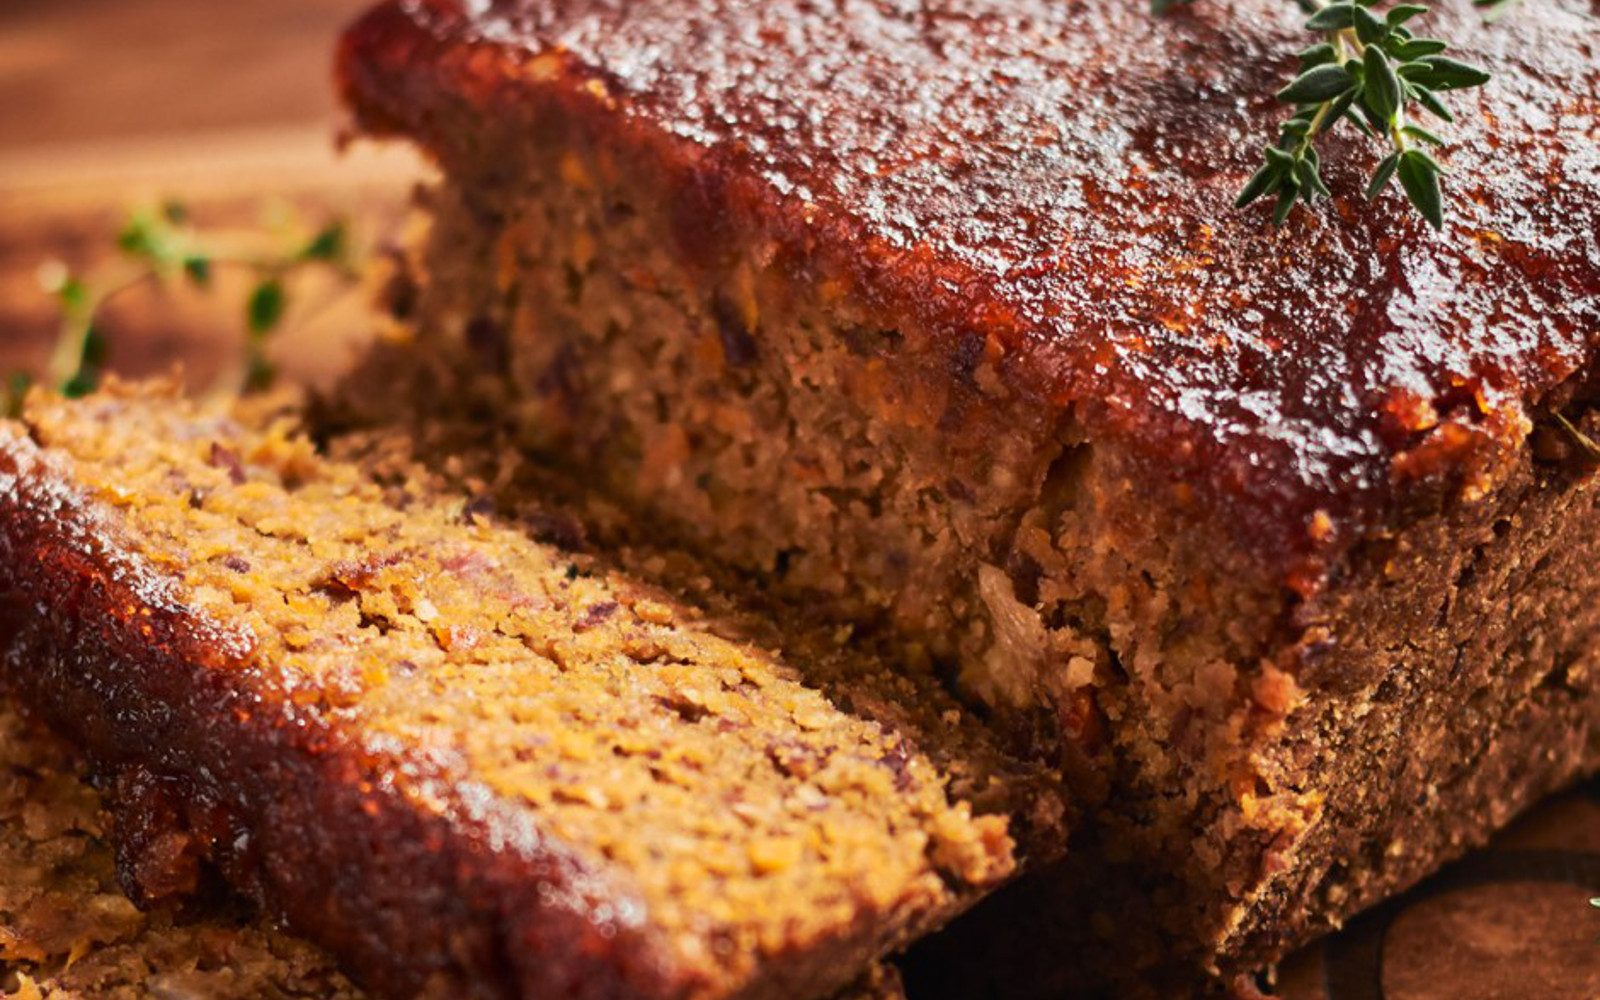 lentil-loaf-square.jpgfit16002C1000ssl1 30 Stunning Plant-Based Entrées That Will Be the Star of Thanksgiving Dinner